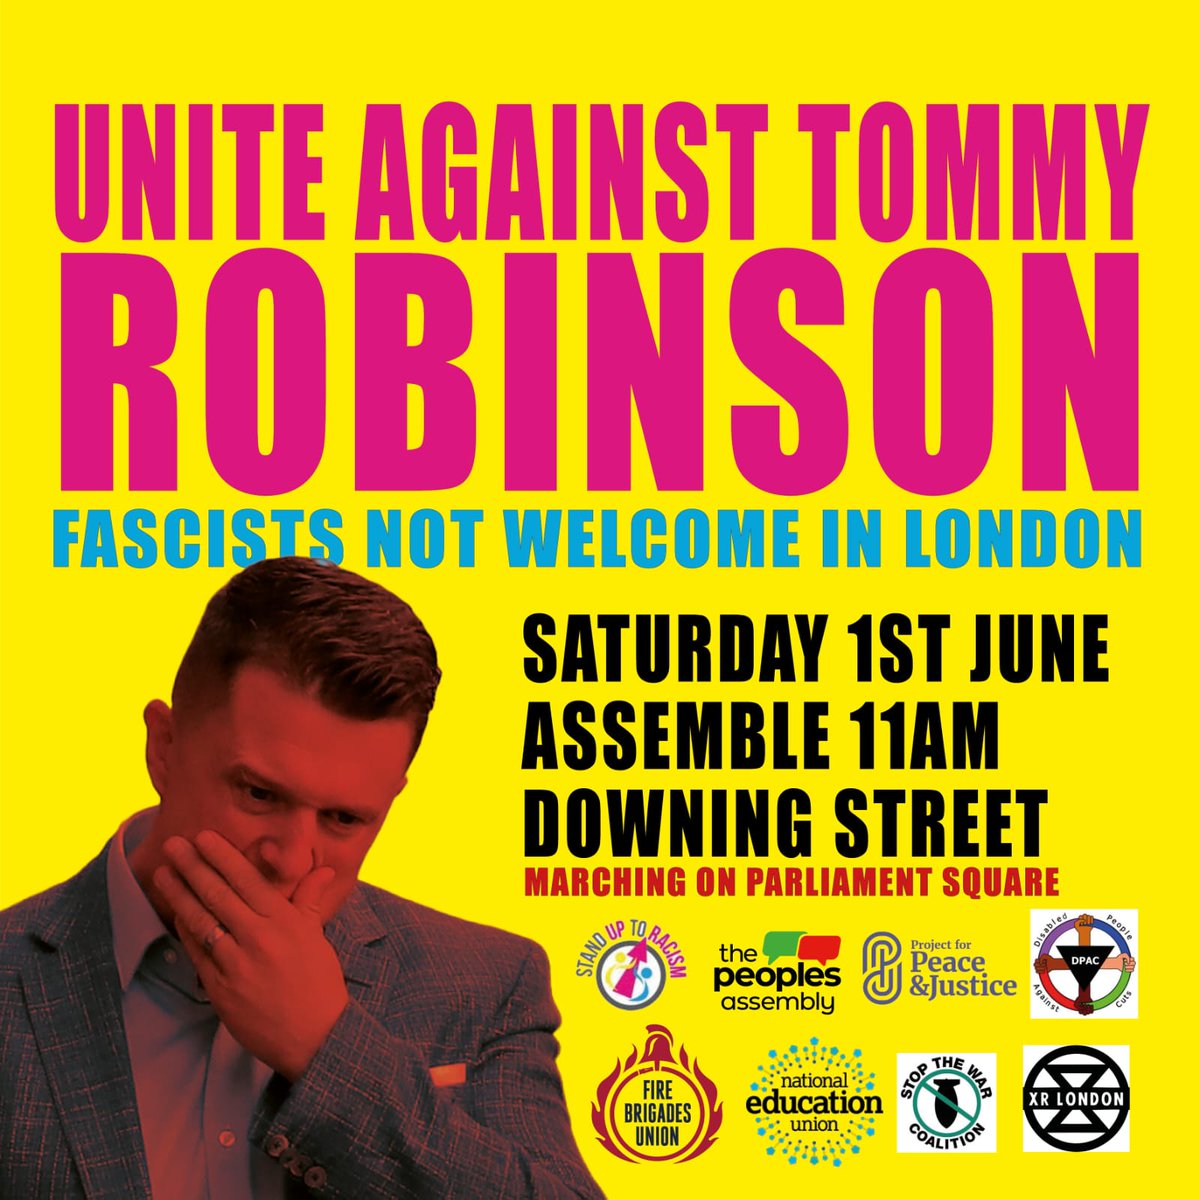 📣 PROTEST - OPPOSE FASCIST TOMMY ROBINSON - ONE WEEK TODAY ⚠️ 🐦 Share far and wide! ⚠️ SAT 1 JUNE 🕚Assemble 11am 📍 Assemble Downing Street 📢 Marching to Parliament Square ✊🏿 Supported by: @NEUnion @fbunational @pplsassembly @corbyn_project @XRLondon @JewishSocialist @STWuk